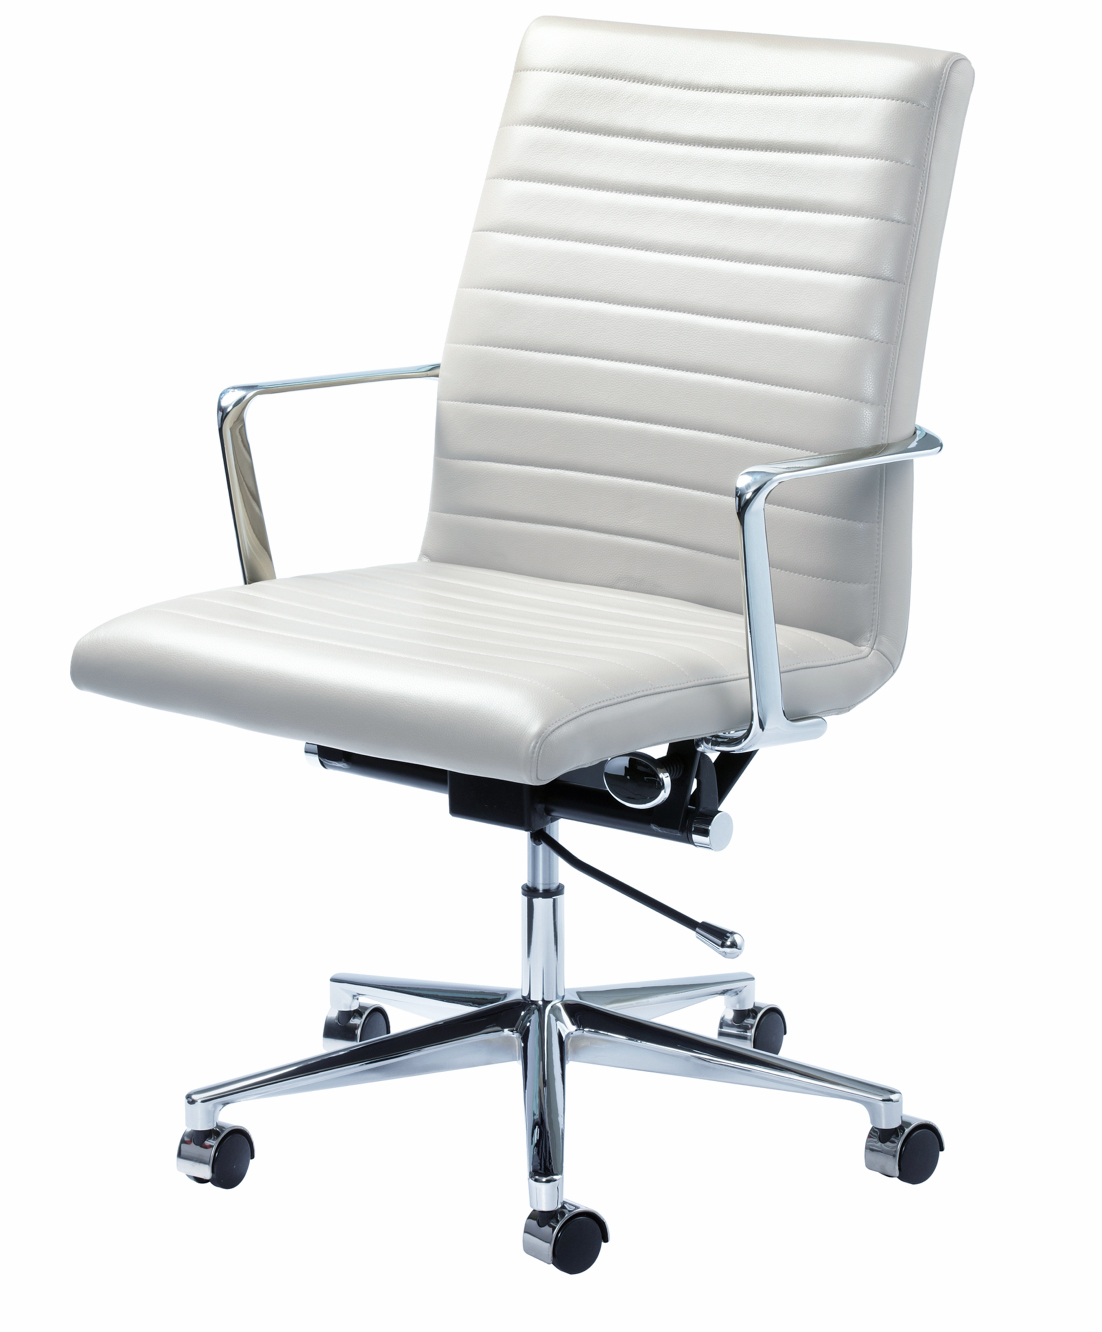 South Beach Style Classic Power Chair in crisp white leather for modern conference rooms